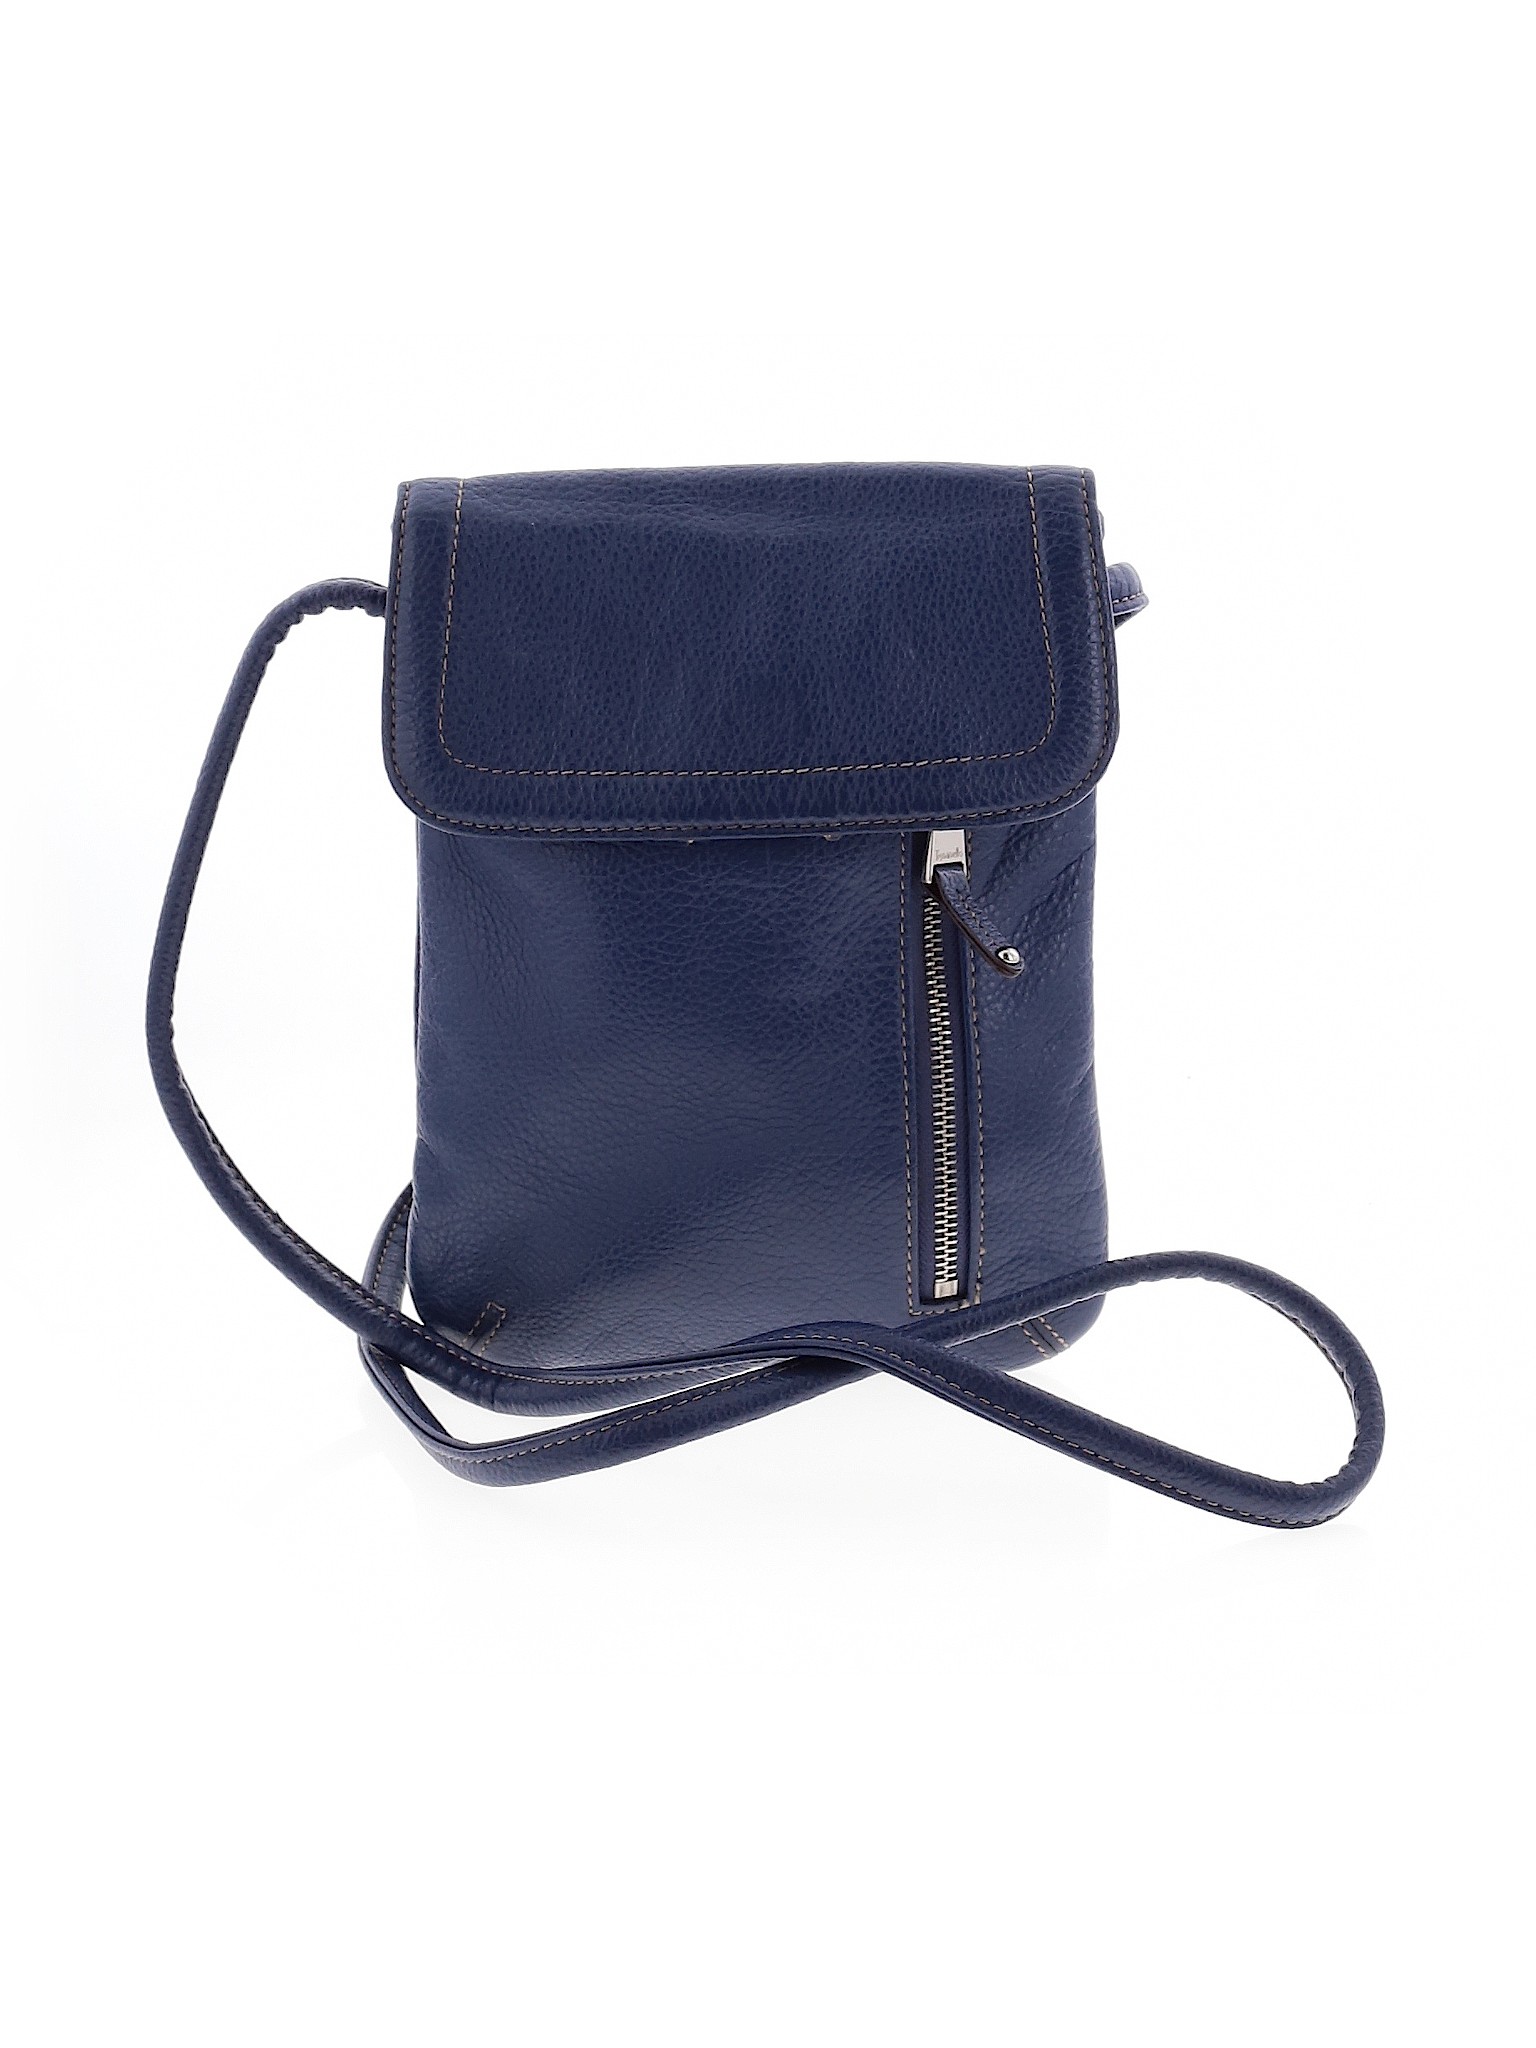 Tignanello 100% Leather Solid Blue Leather Crossbody Bag One Size - 72% ...